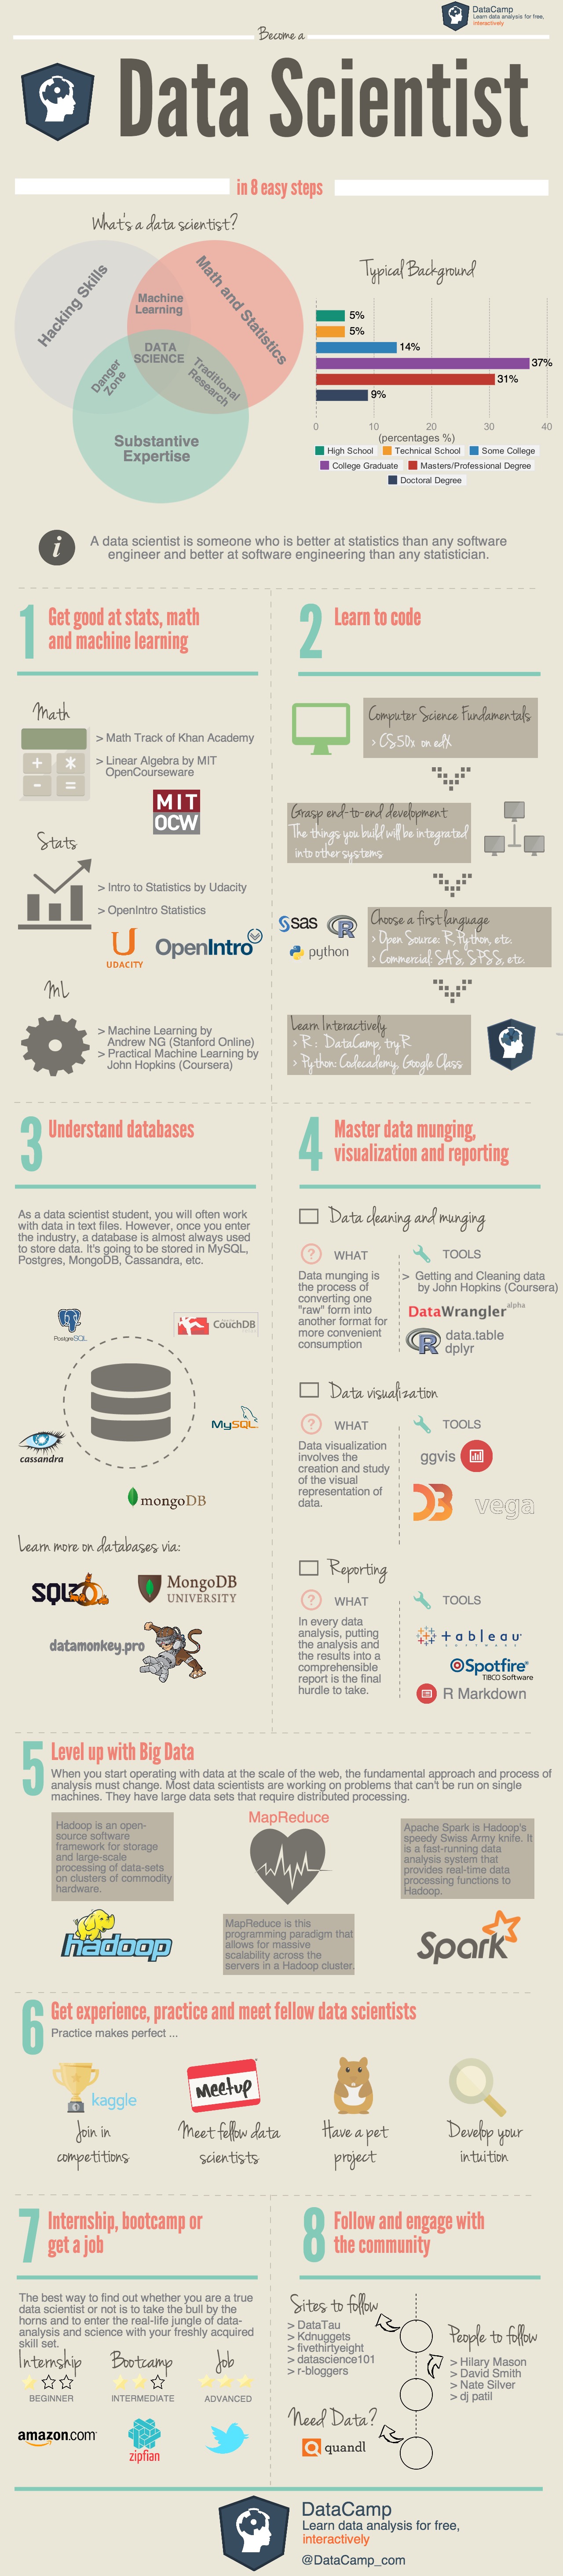 New Infographic: How to become a data scientist in 8 steps